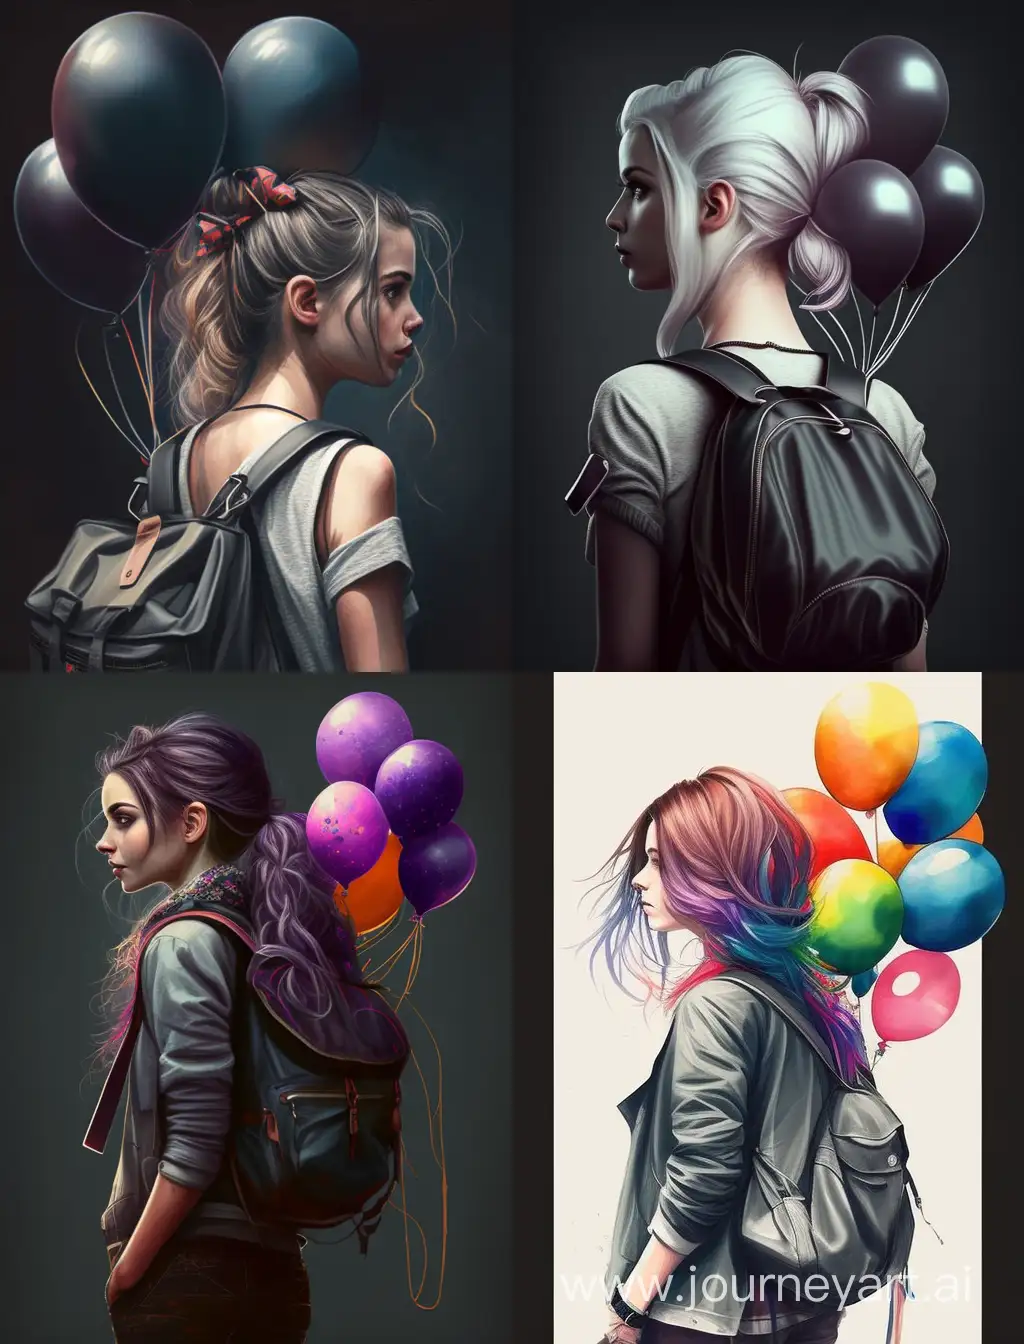 Chic-Girl-with-Balloons-Fashionable-Elegance-Captured-in-Vibrant-Colors